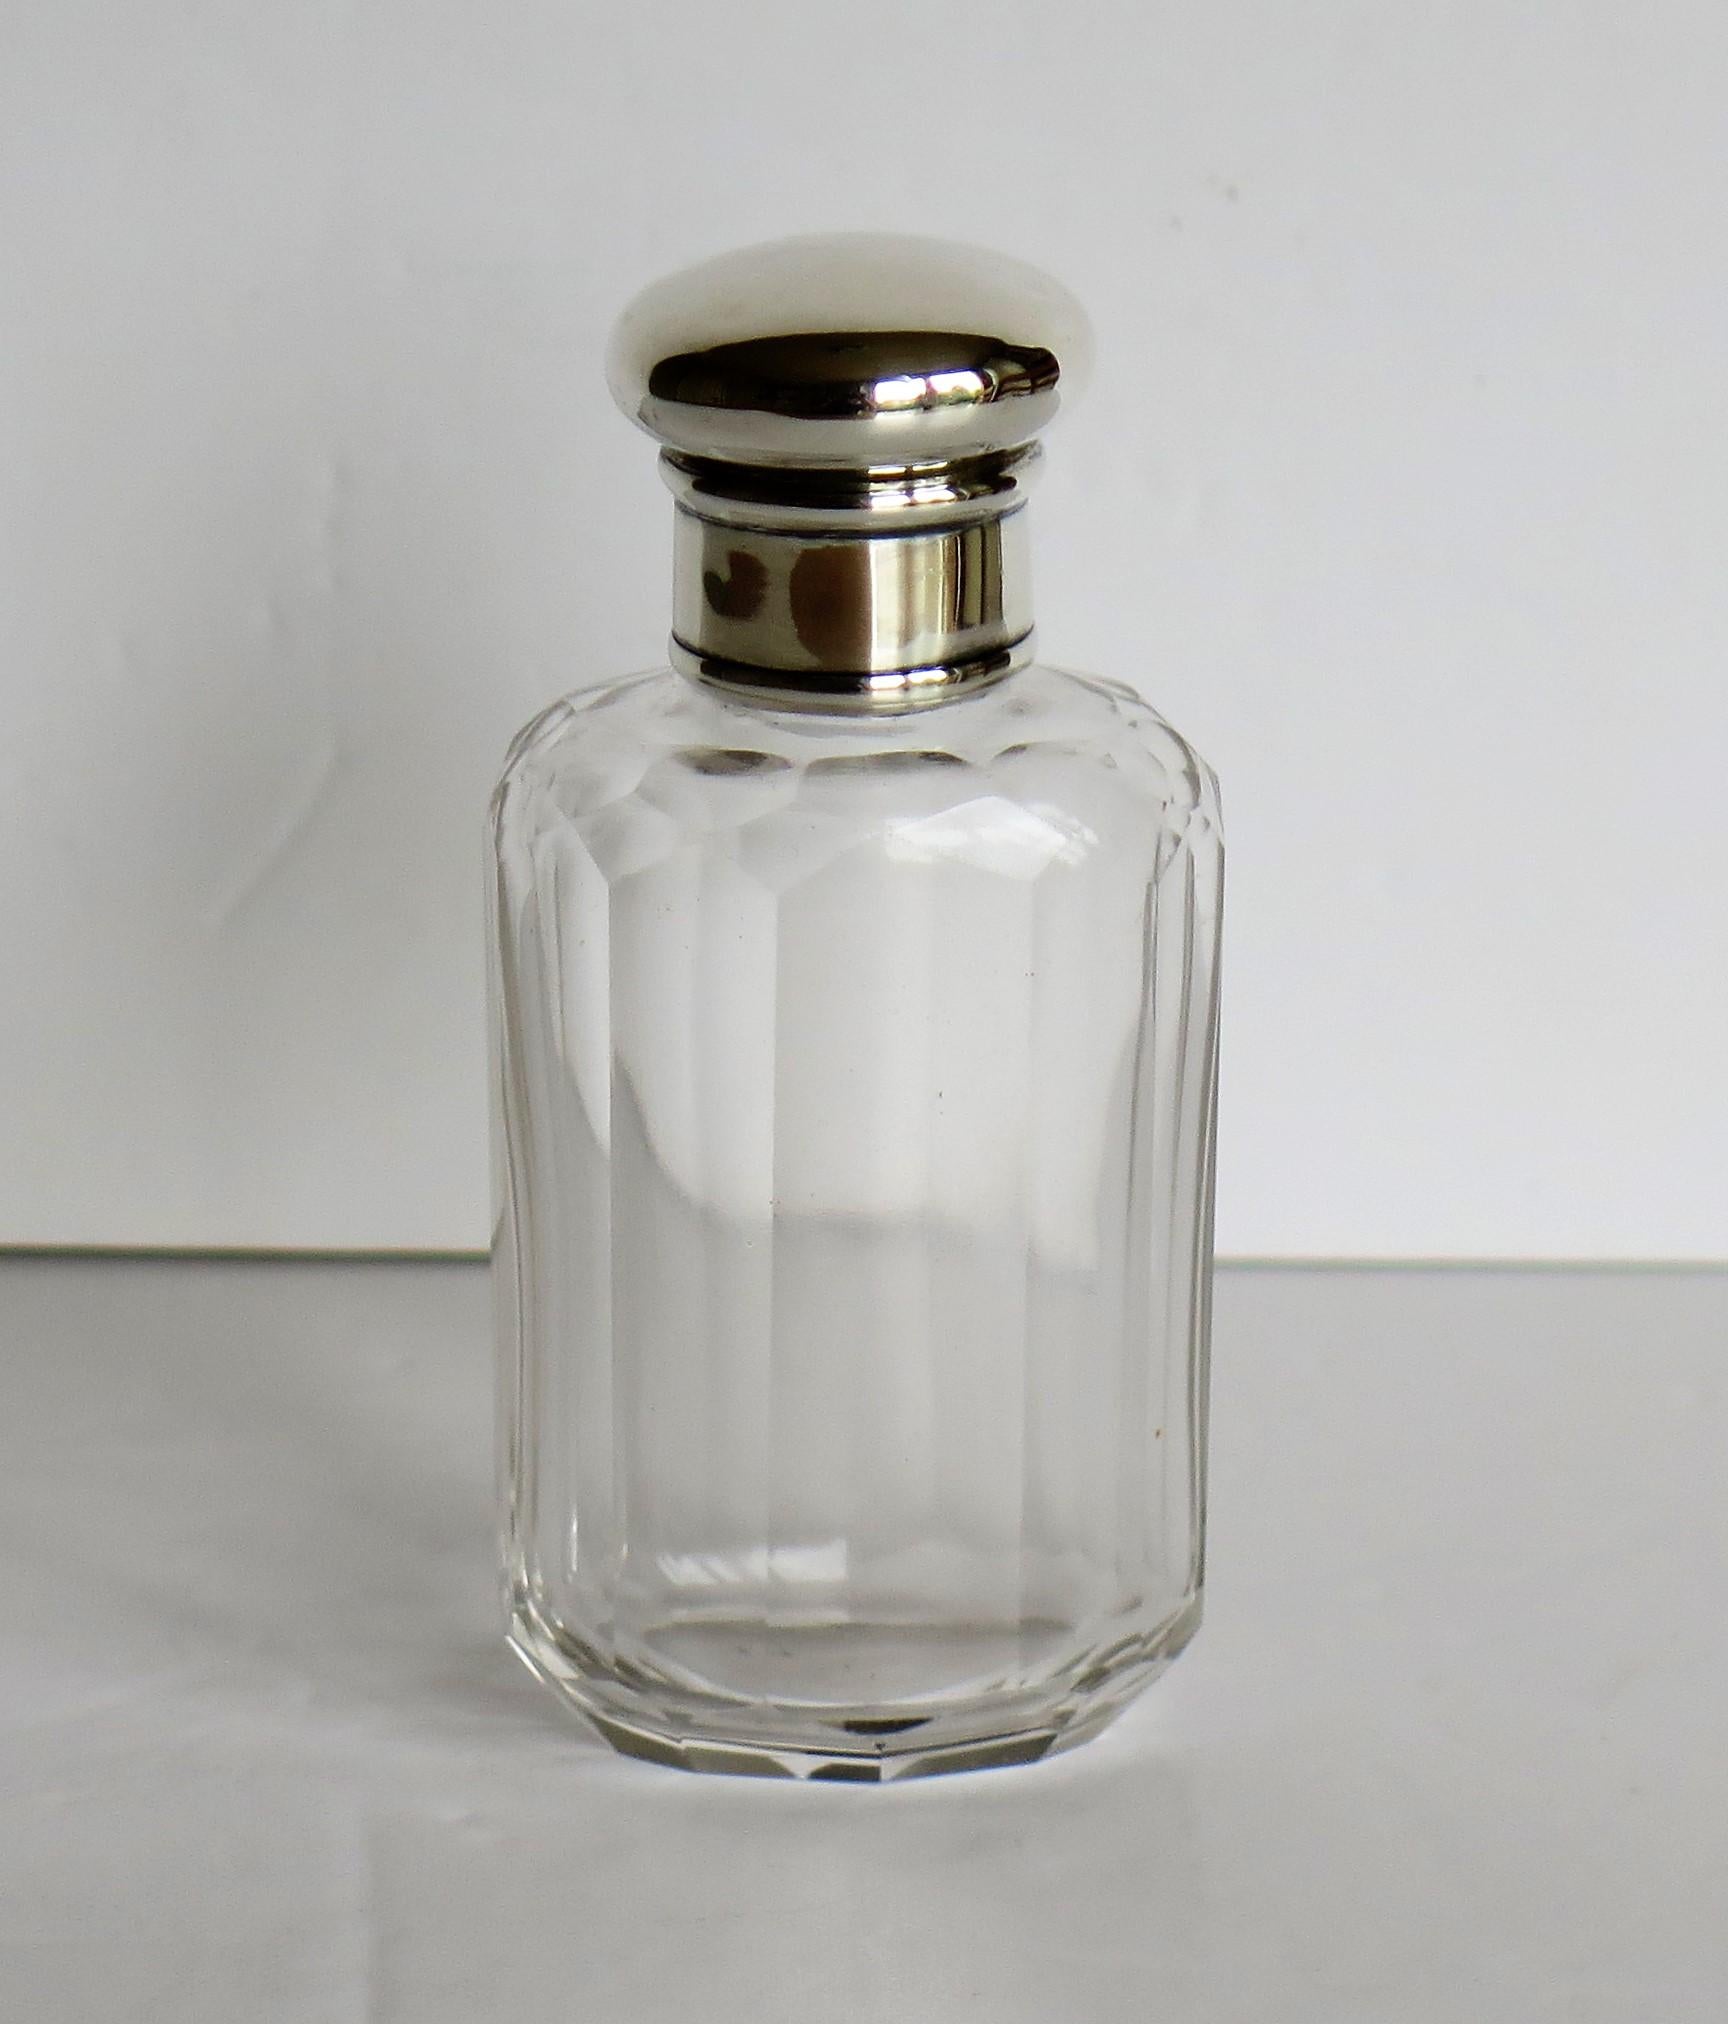 Hand-Crafted Crystal Glass Cologne or Perfume Bottle with Sterling Silver Top, London, 1926